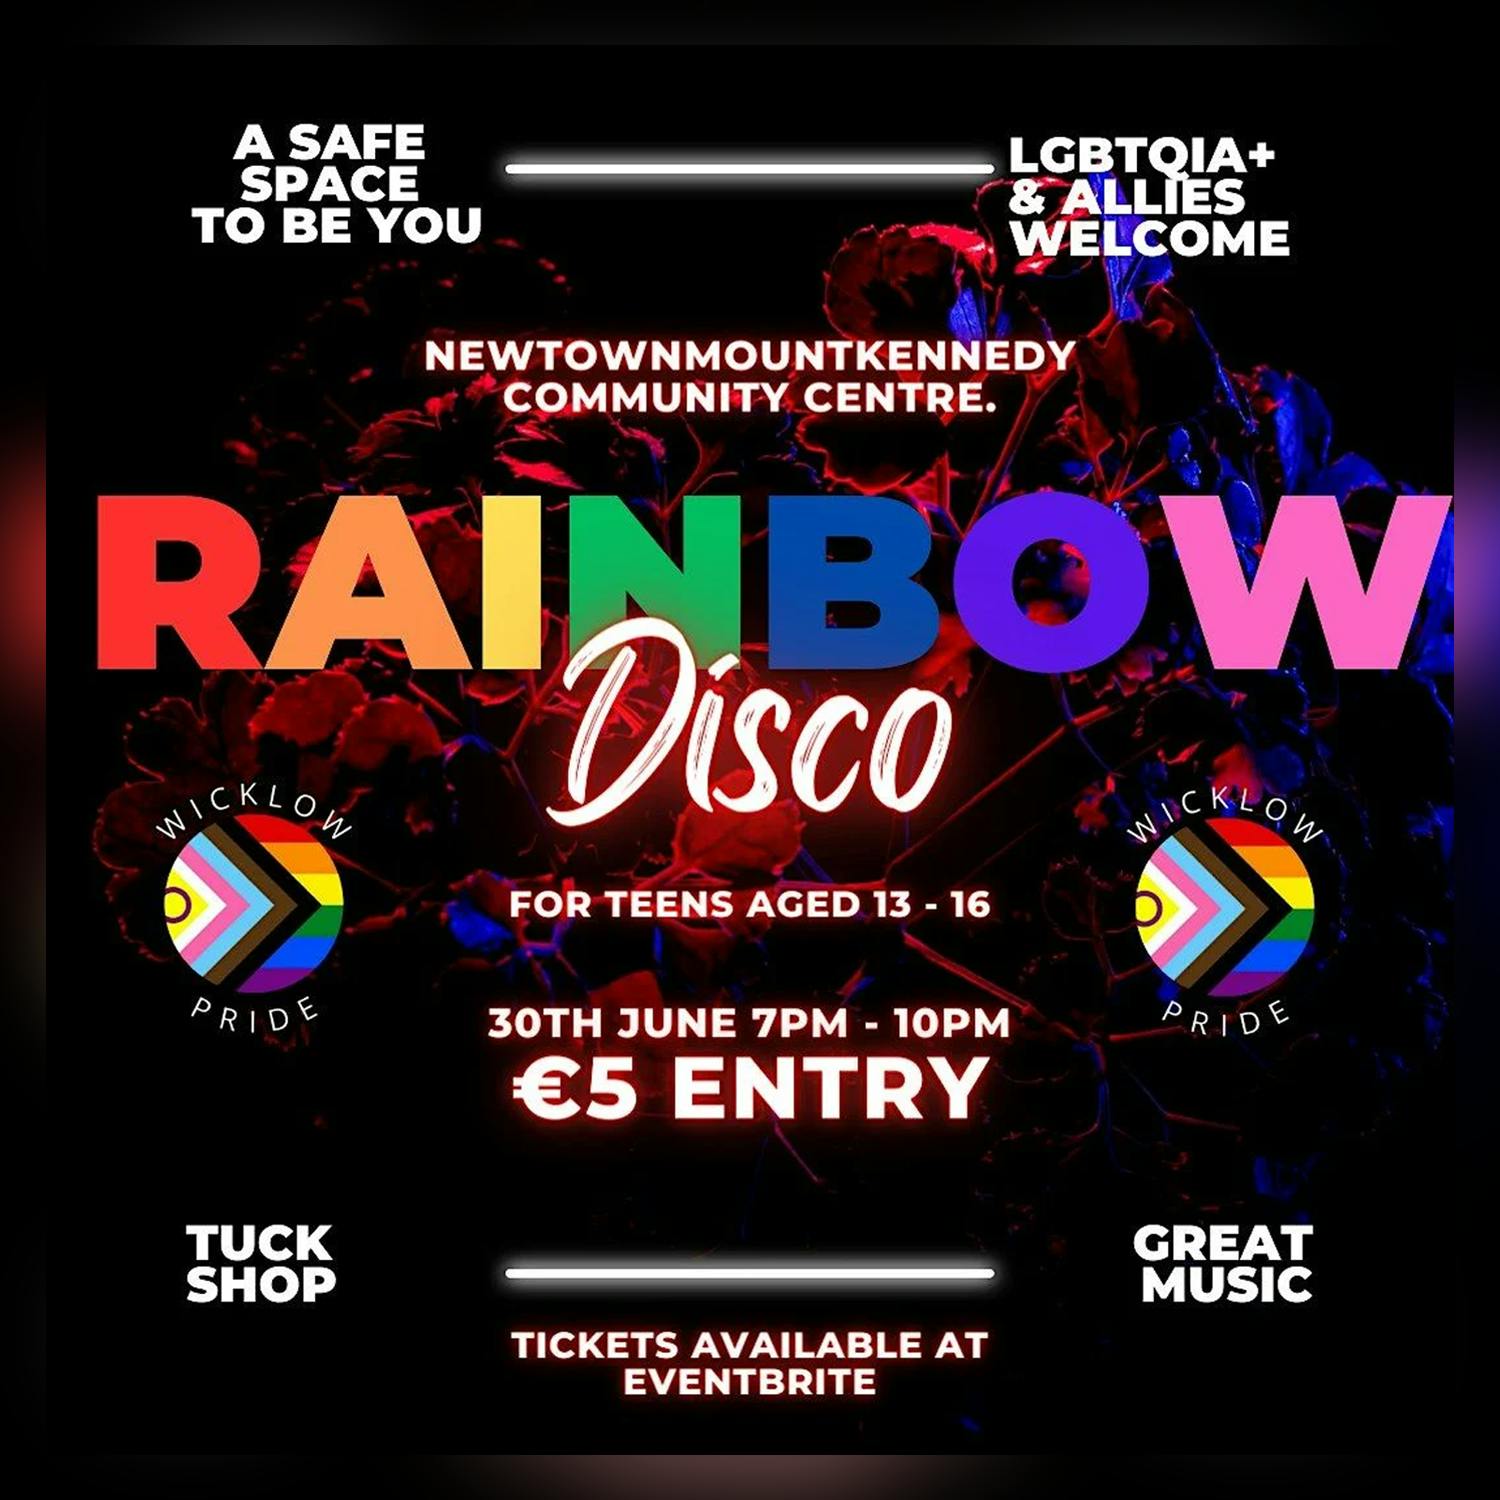 A poster for the Rainbow Disco event in Co Wicklow